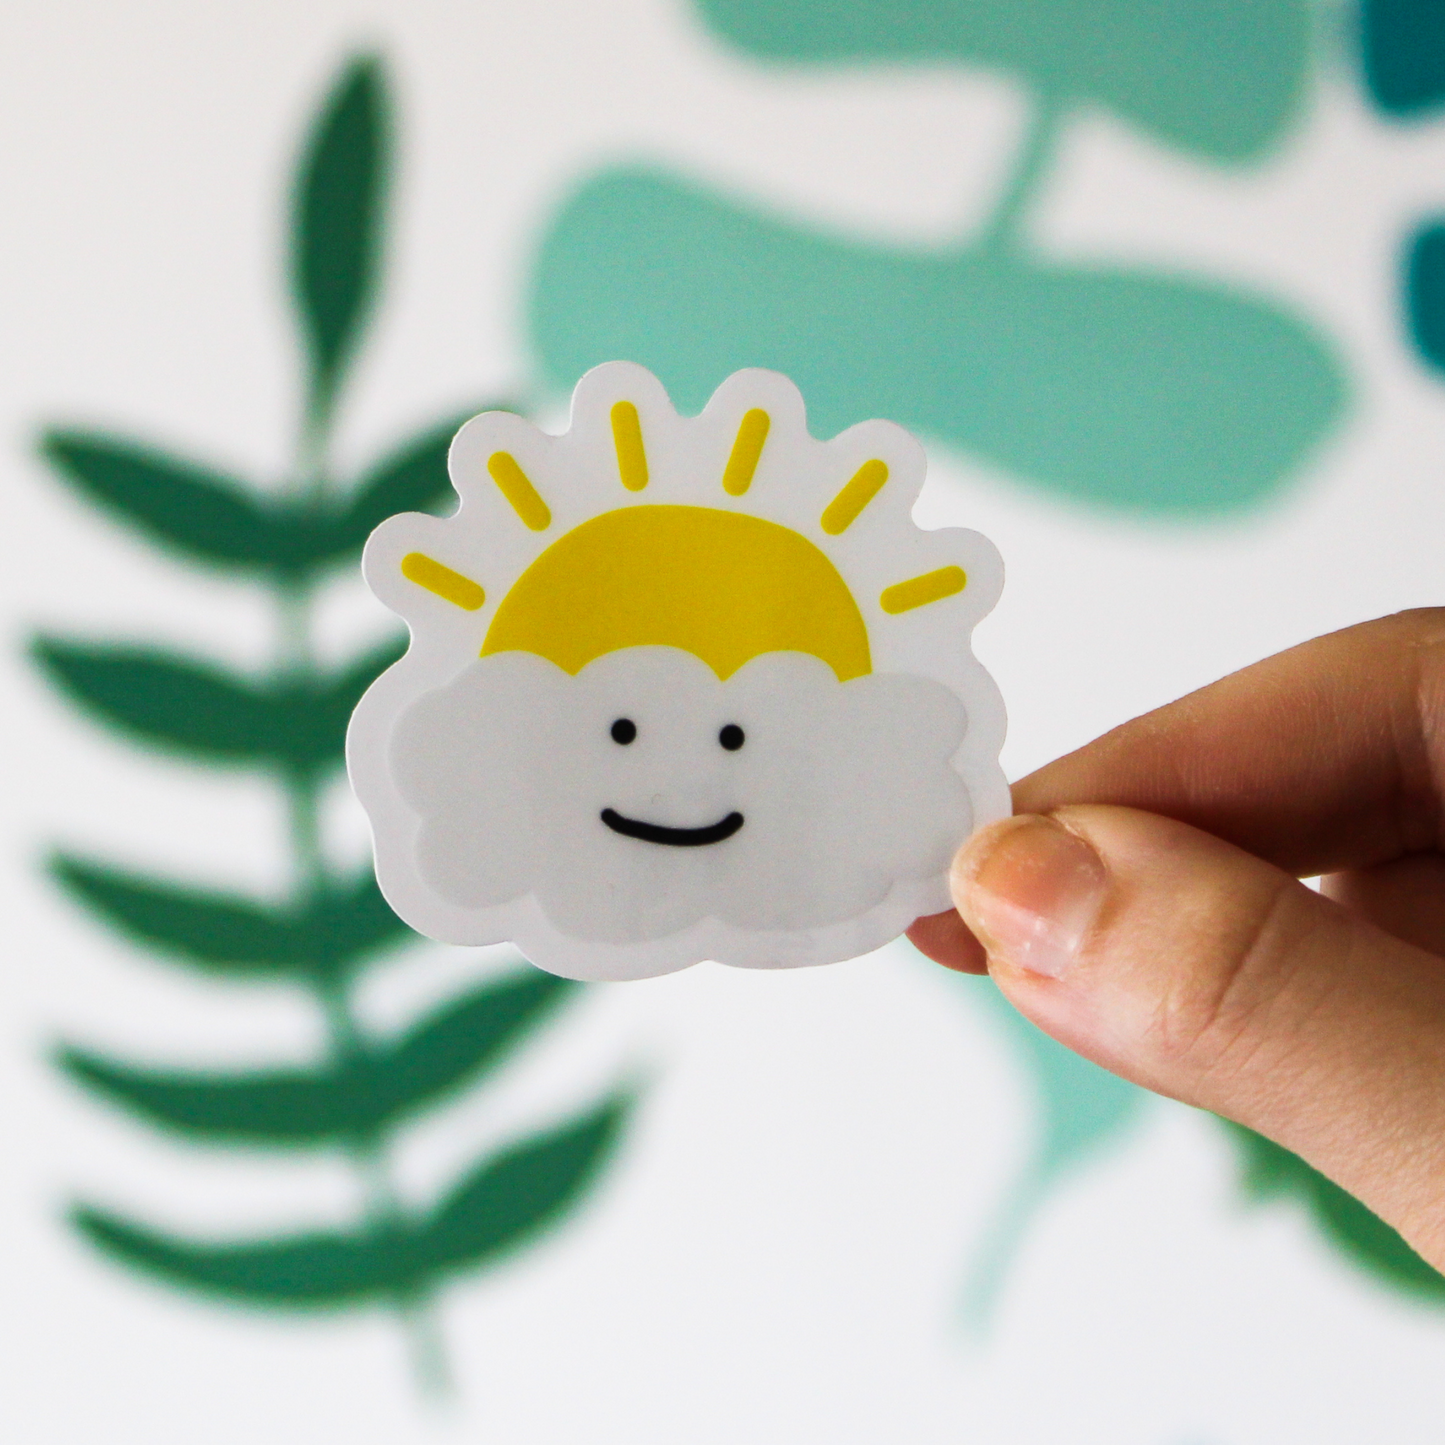 A blurred leaf pattern in the background. In front is a hand holding a happy cloud sticker with a sun popping out behind it.